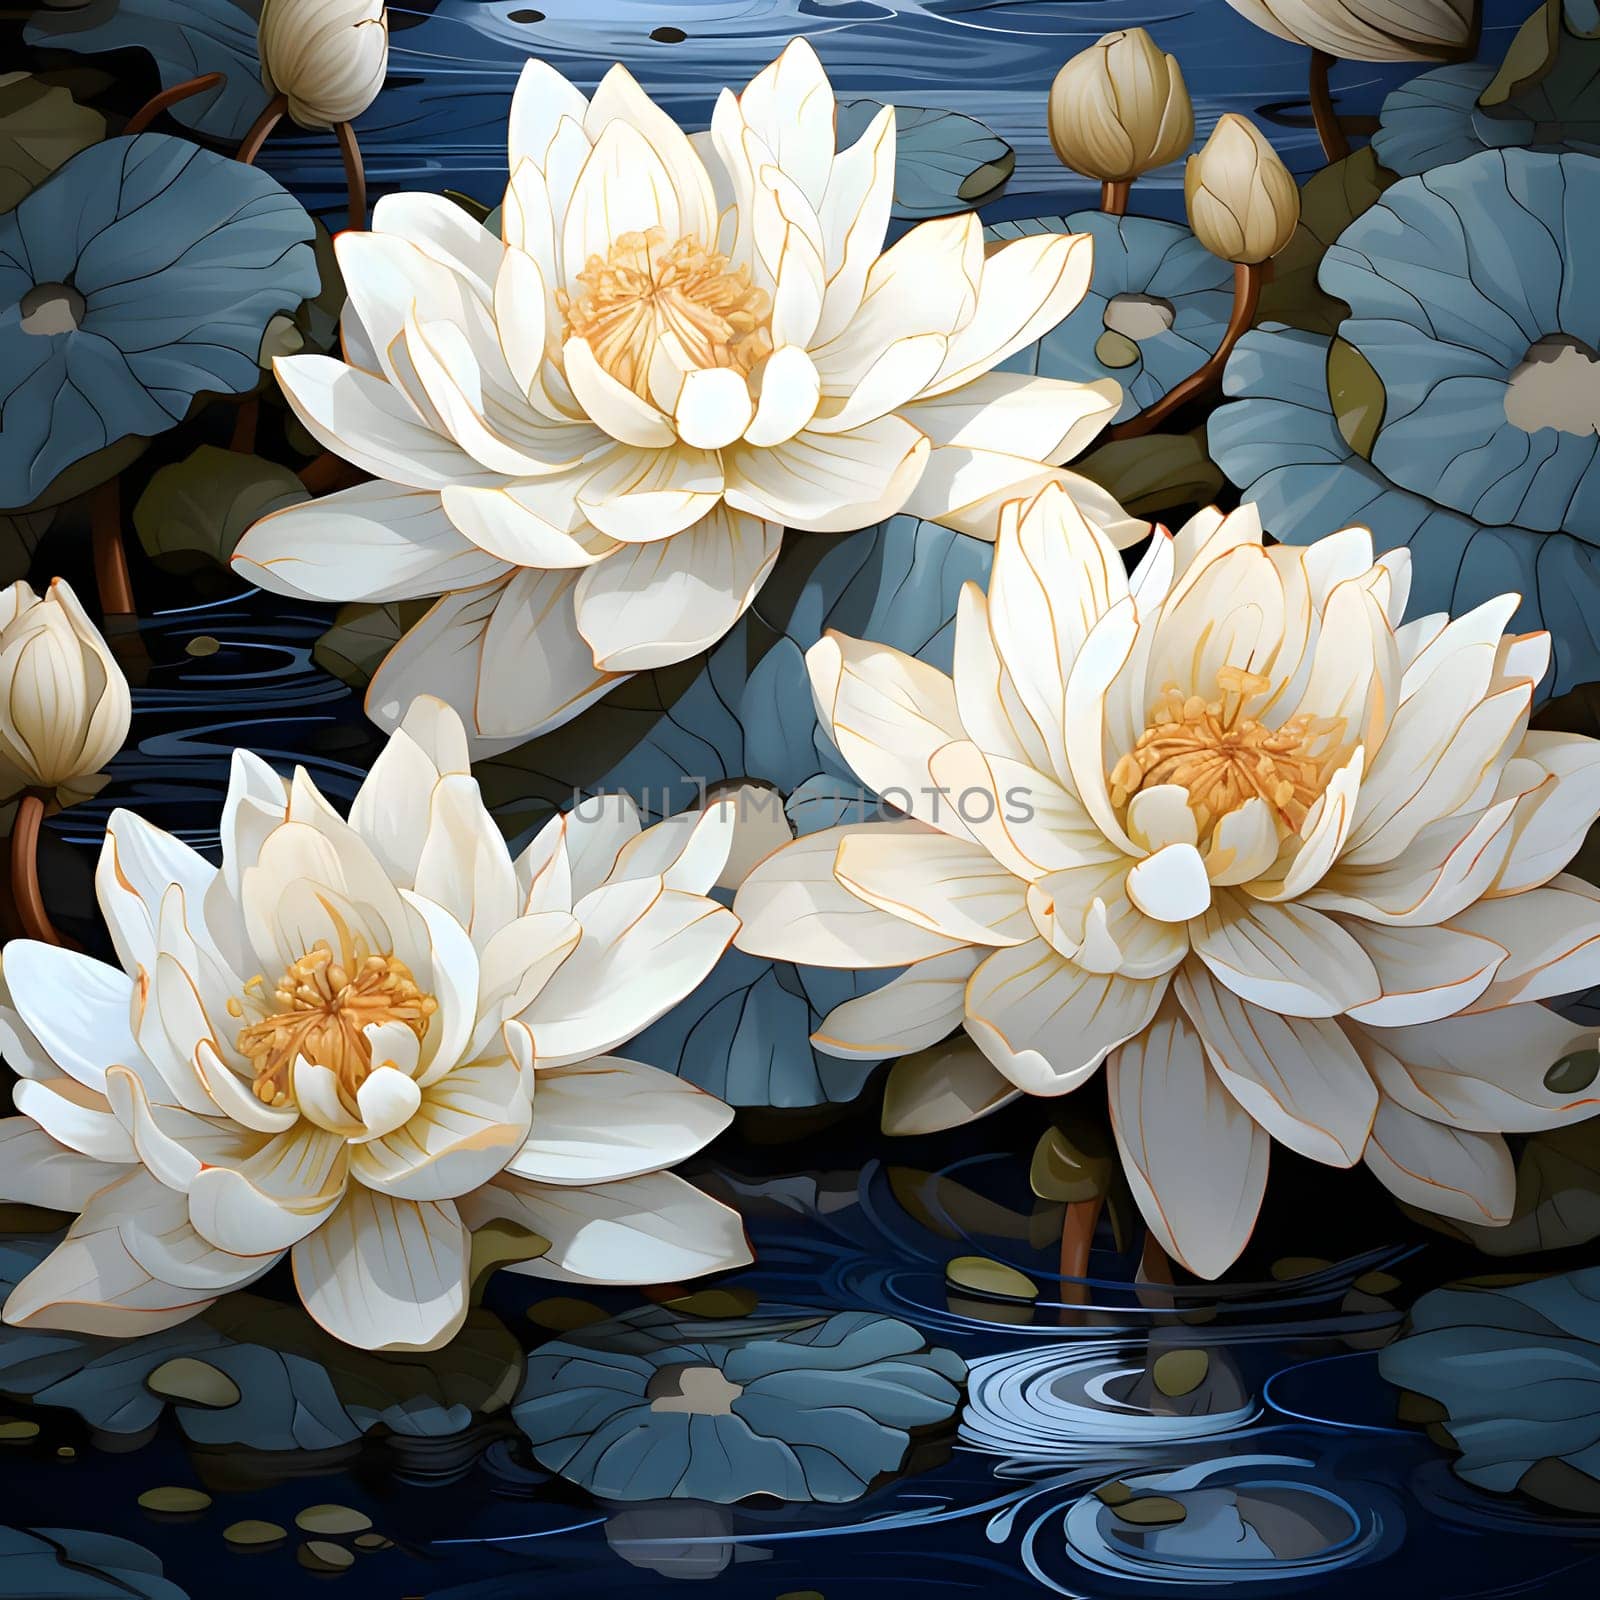 Patterns and banners backgrounds: Seamless pattern with water lilies and leaves. Vector illustration.